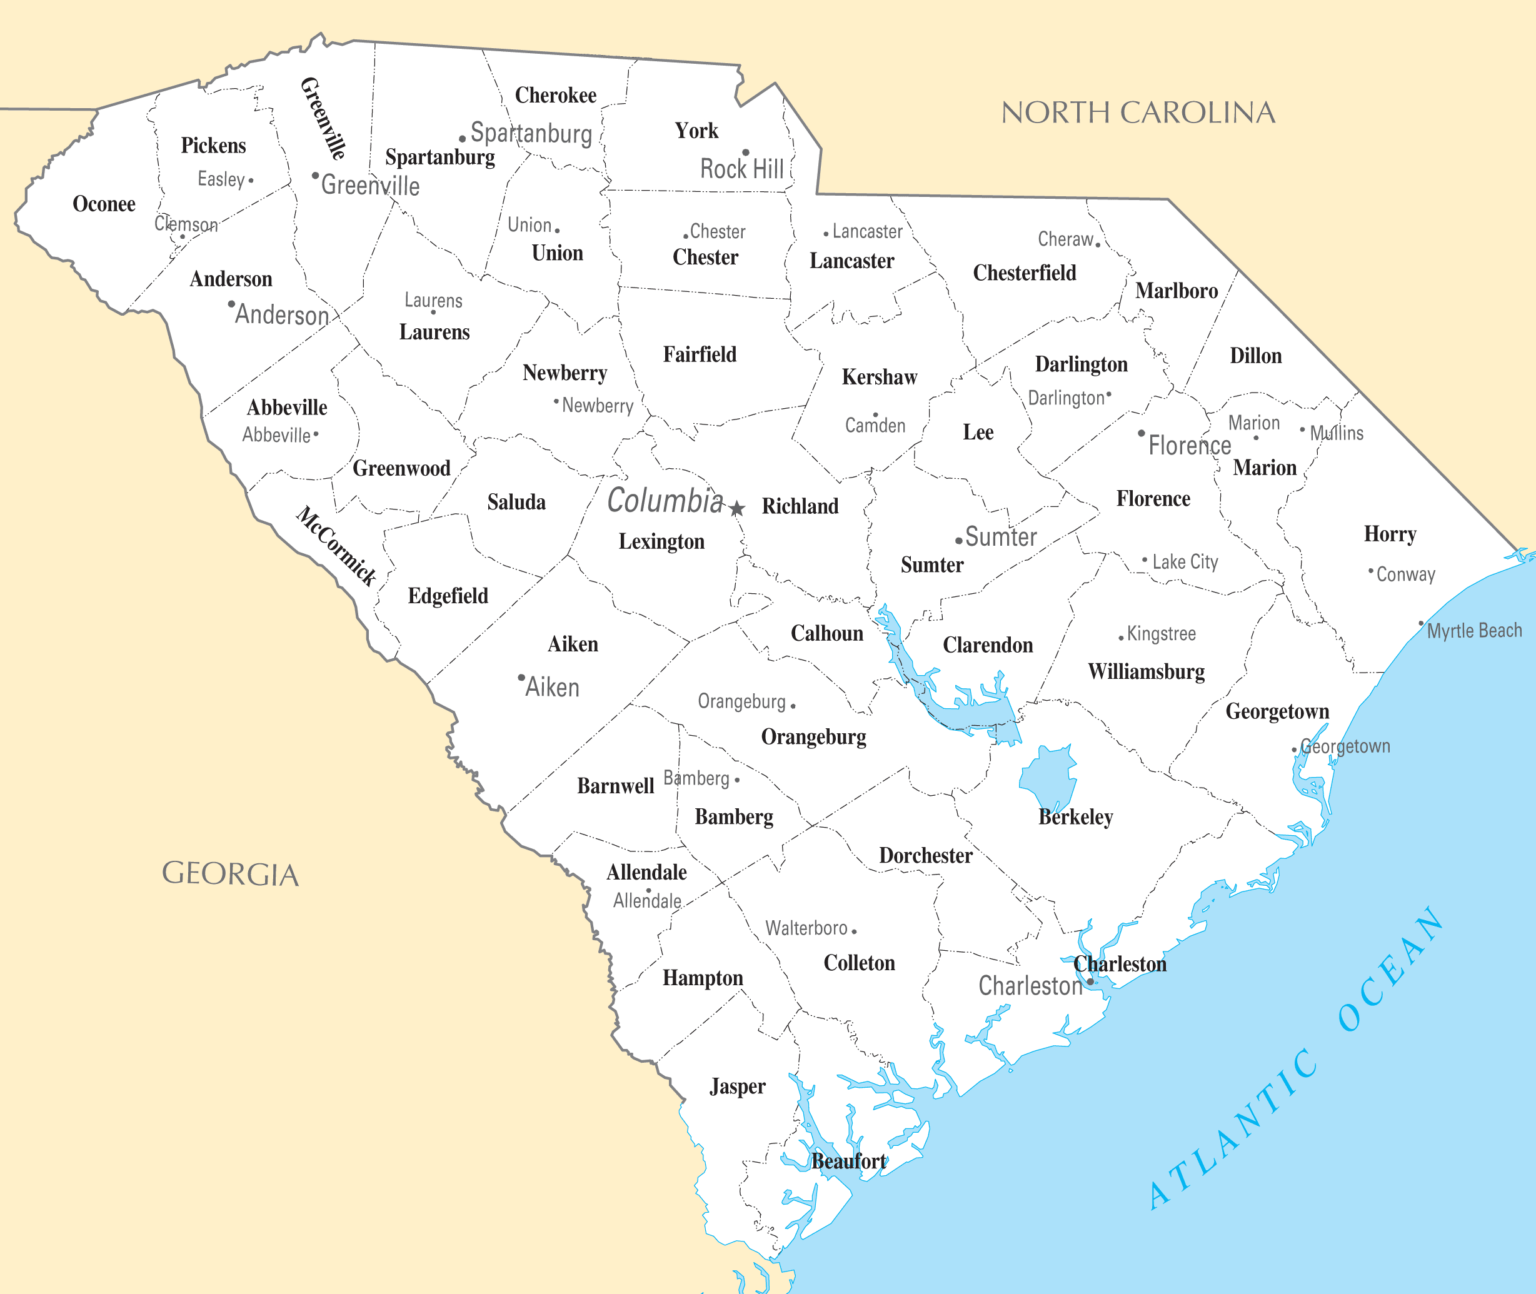 South Carolina Cities And Towns Mapsof Printable Map Of The United States 7228